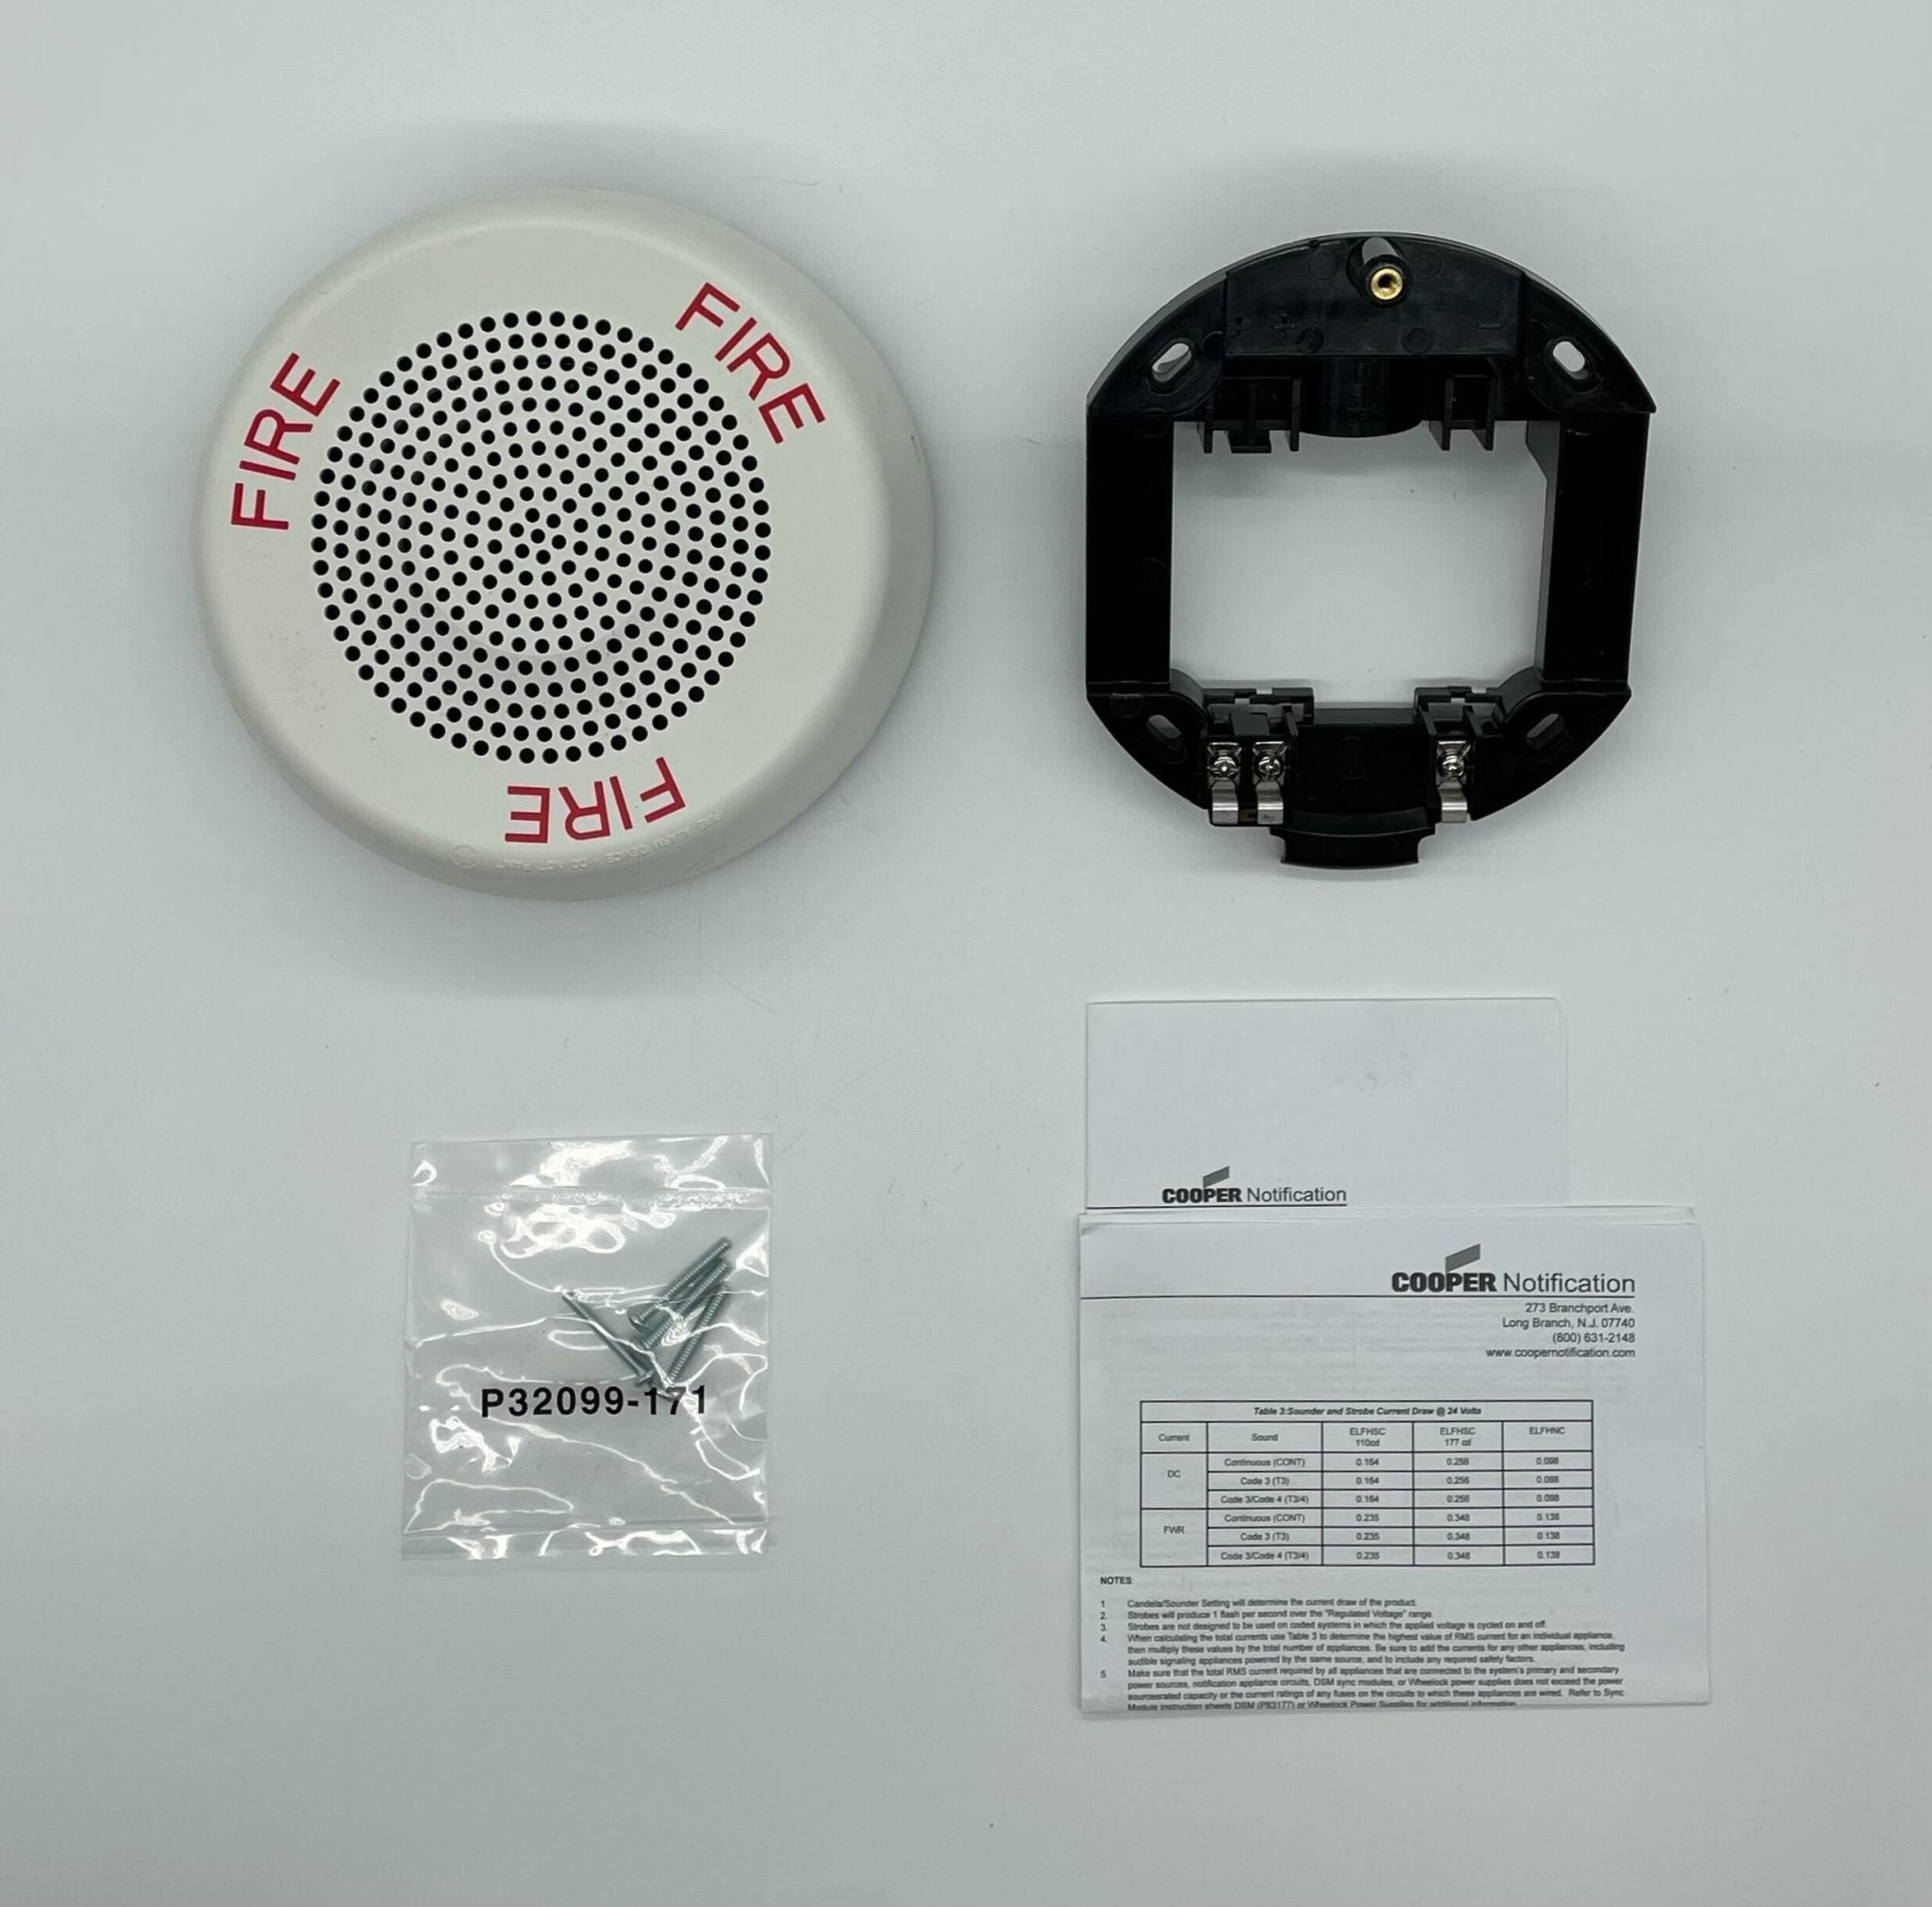 Wheelock ELFHNWC - The Fire Alarm Supplier